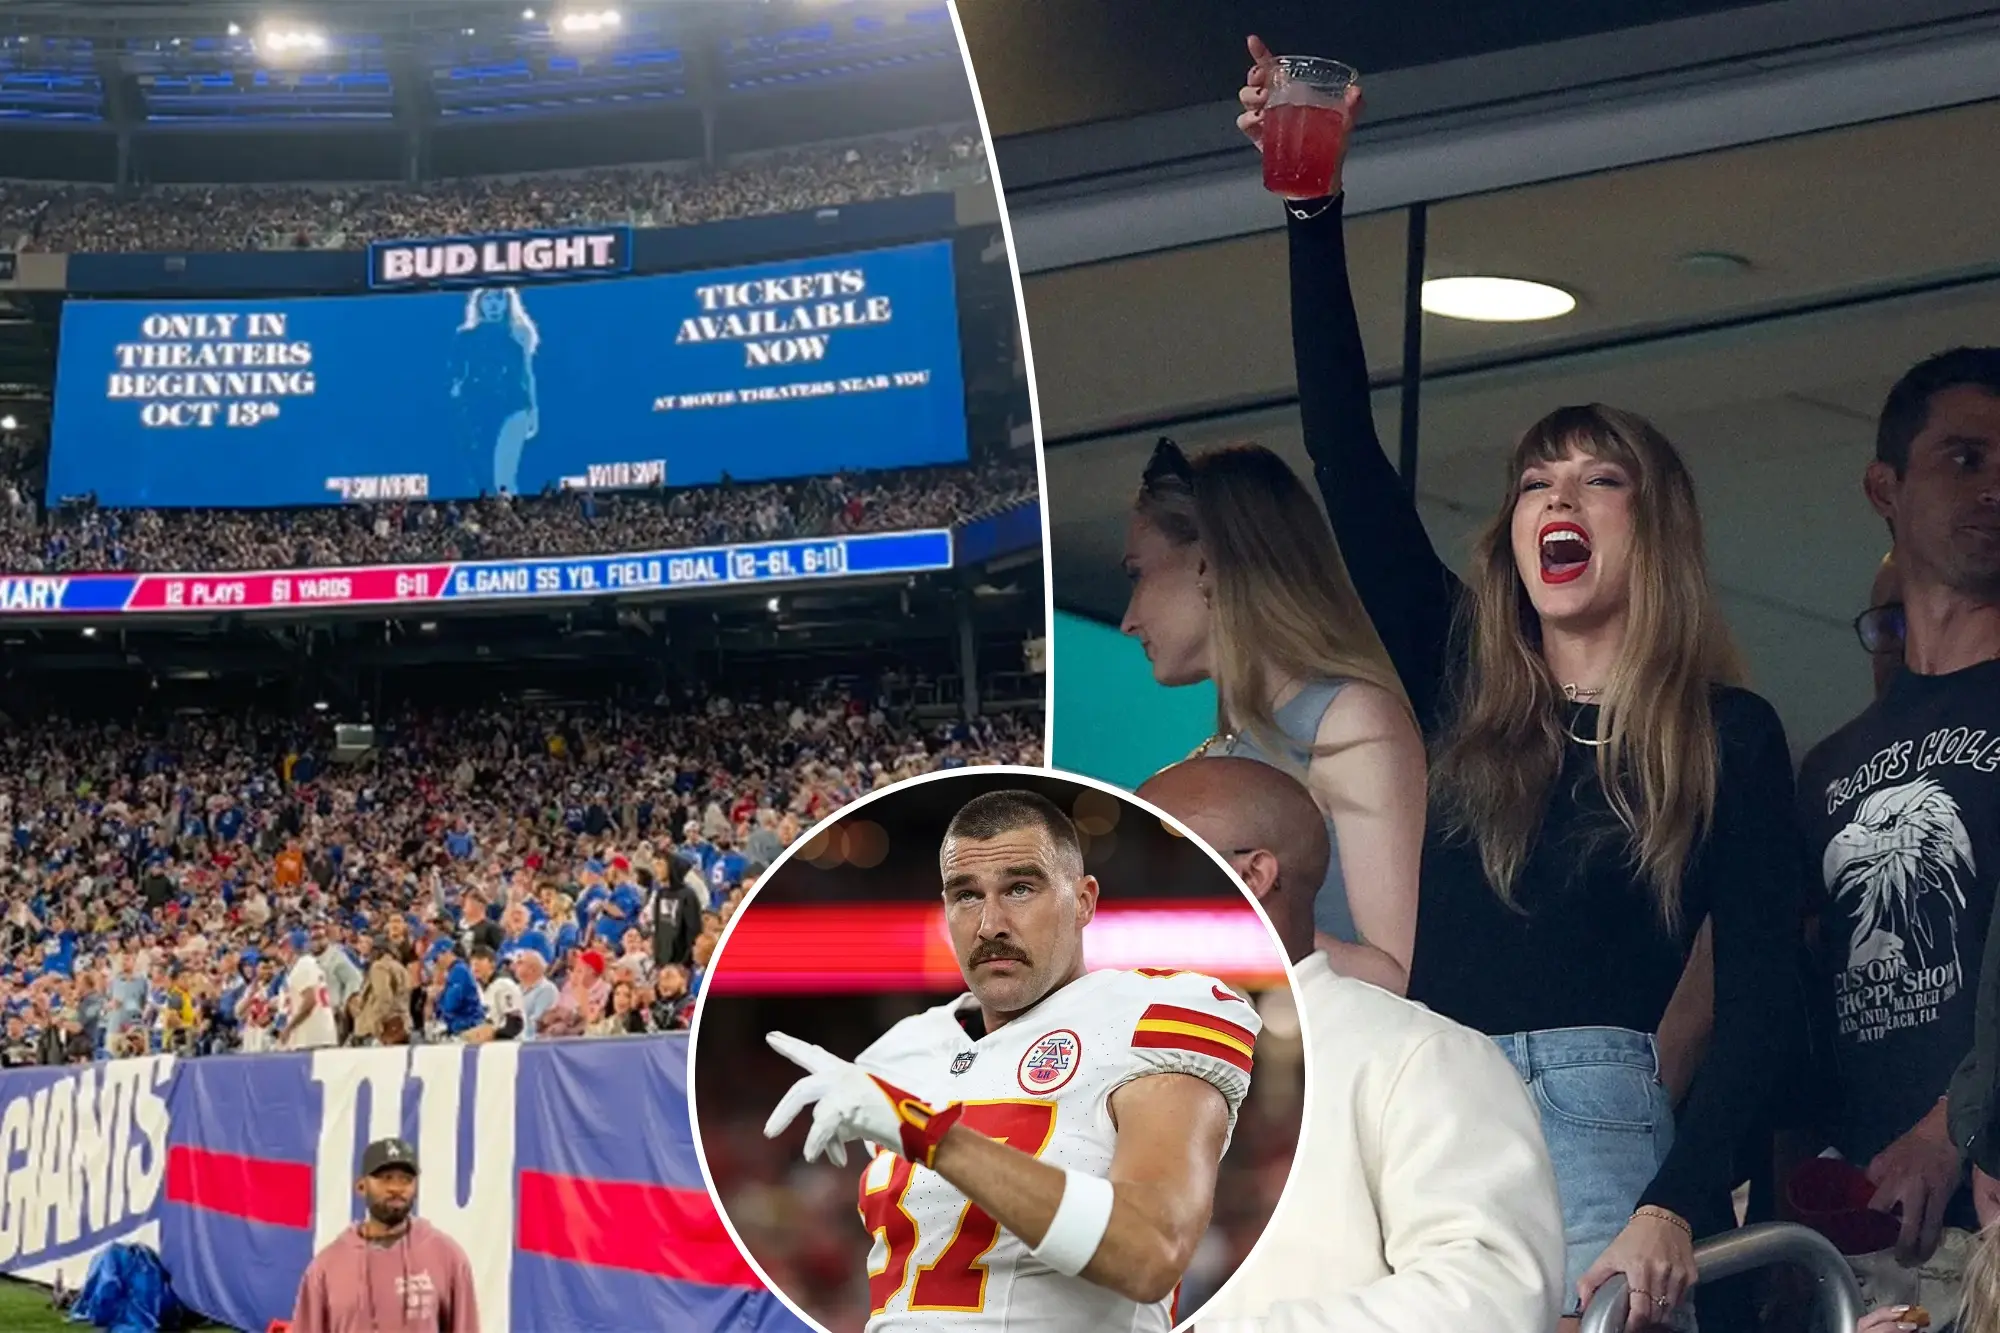 taylor-swift-ad-booed-by-new-york-giants-fans-at-metlife-stadium-during-monday-night-football